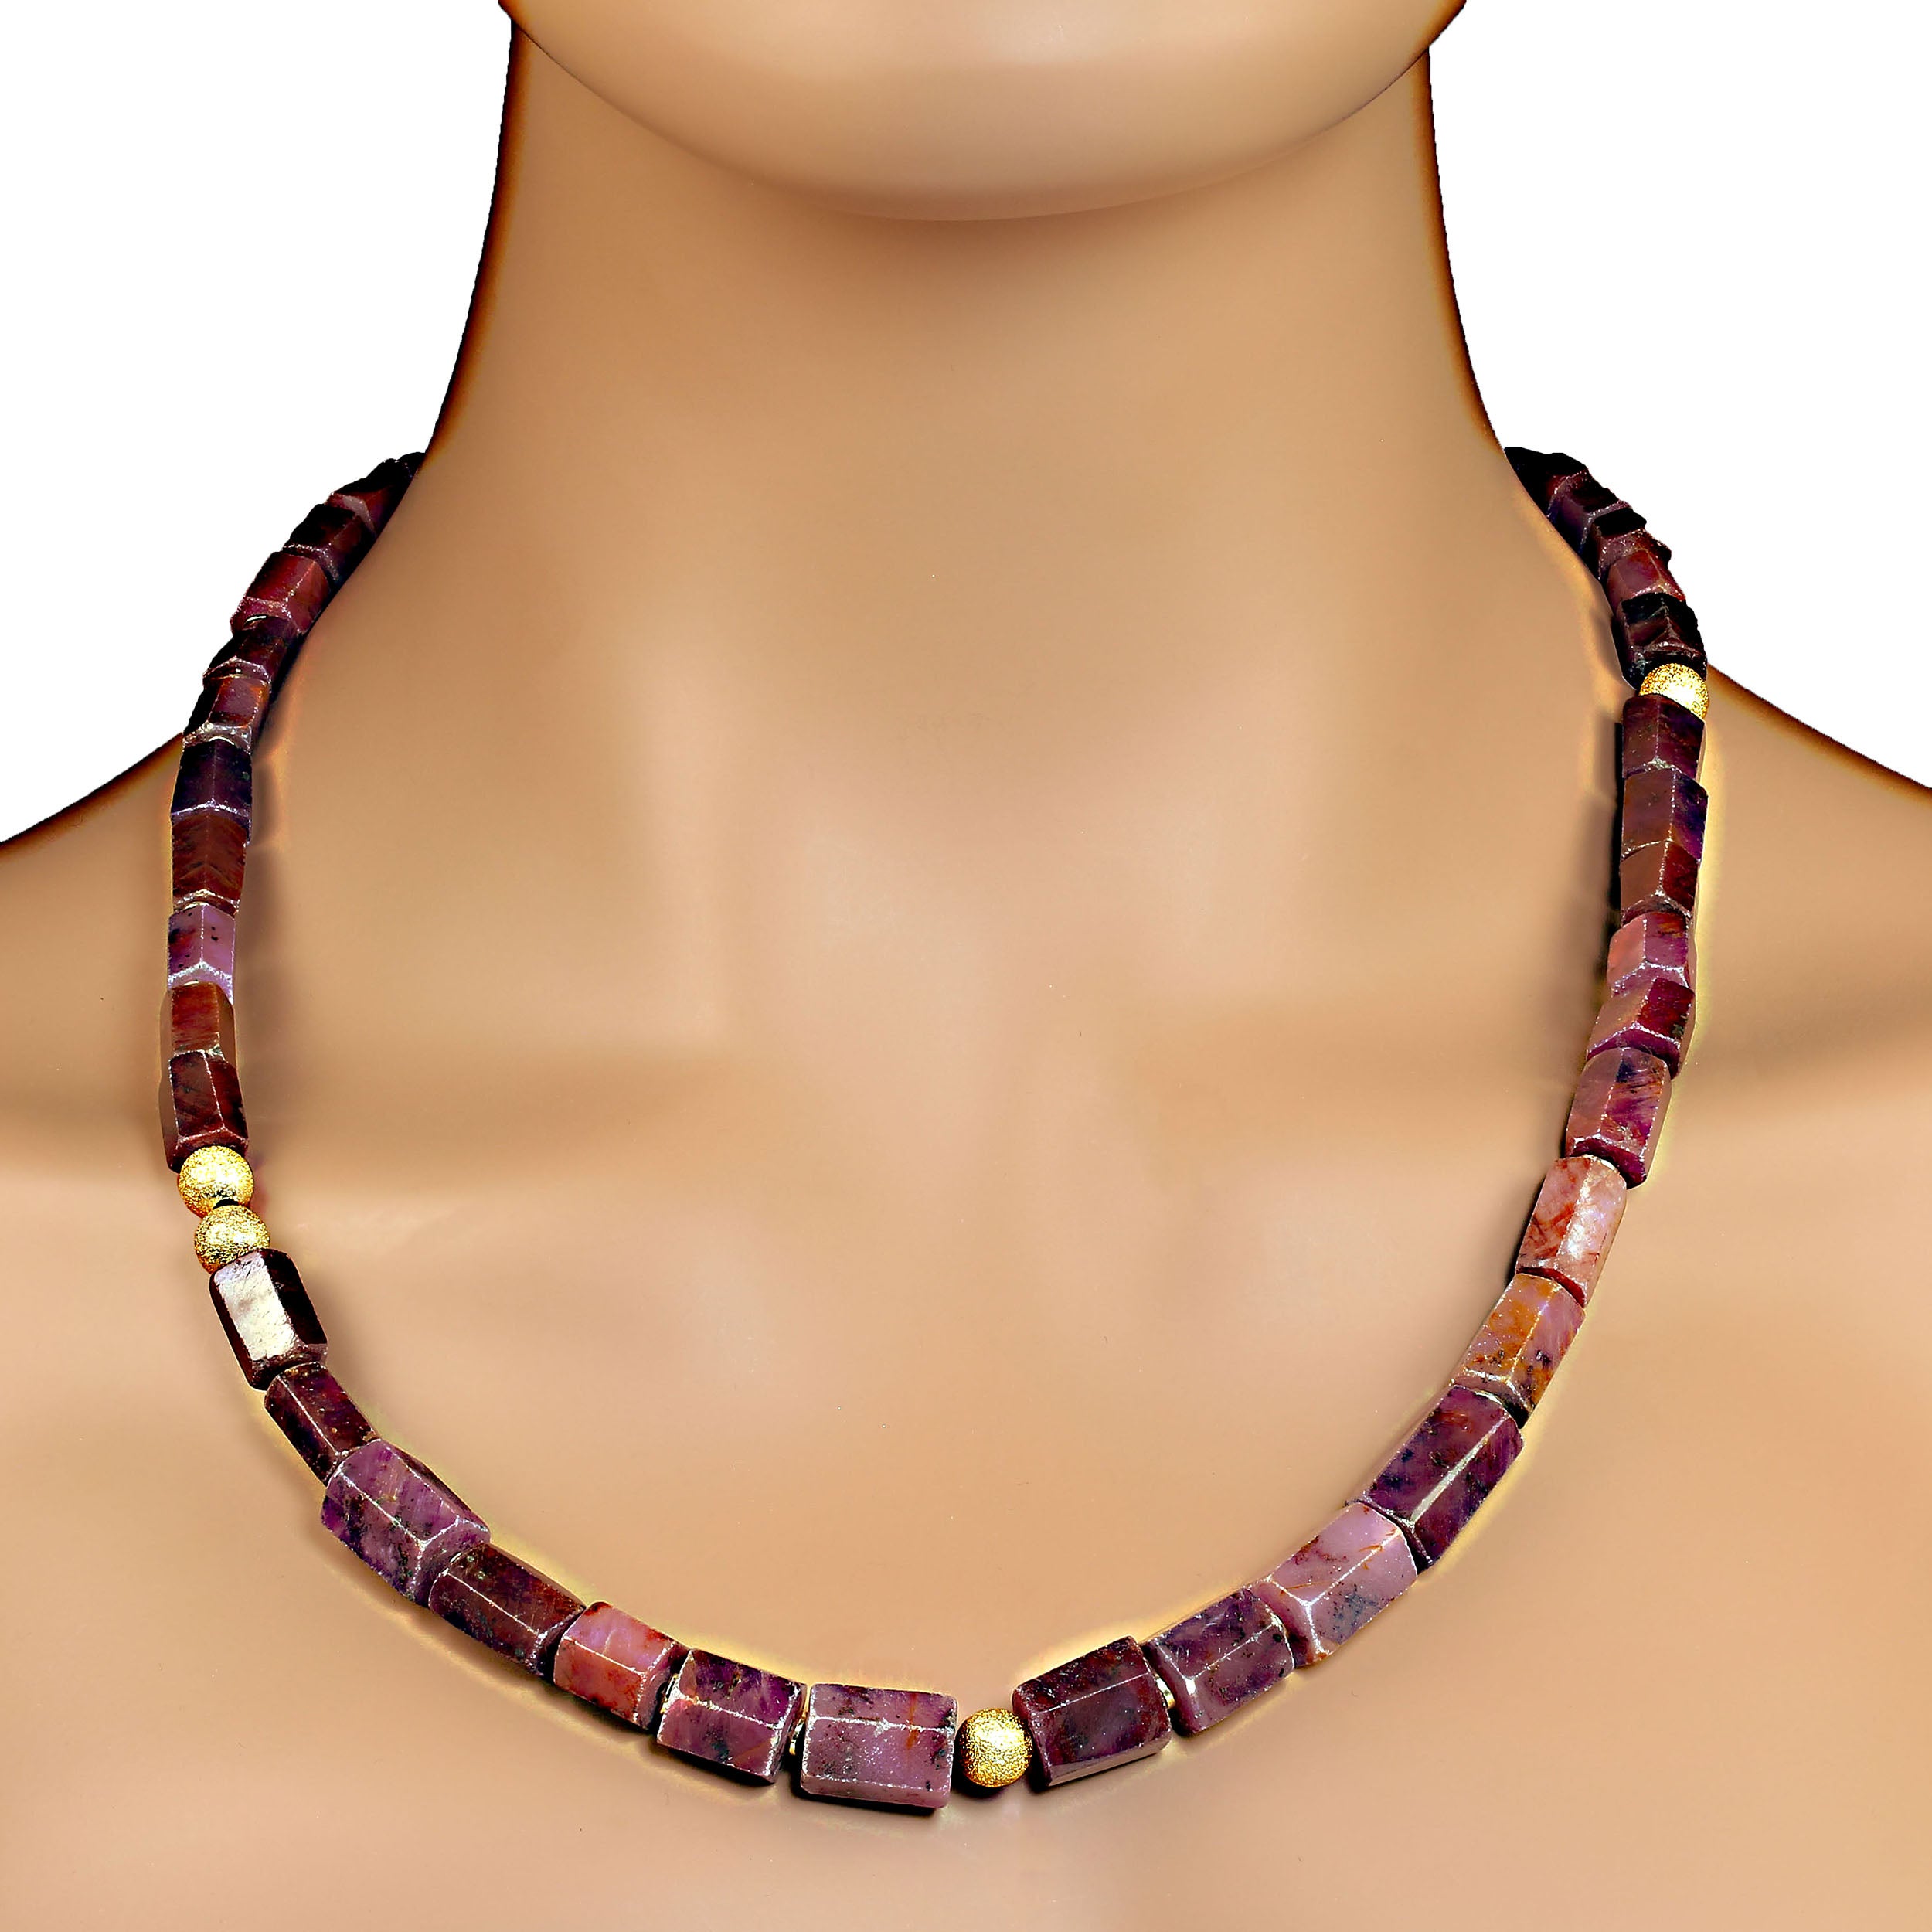  AJD 23 Inch Exotic African Natural Ruby Necklace 